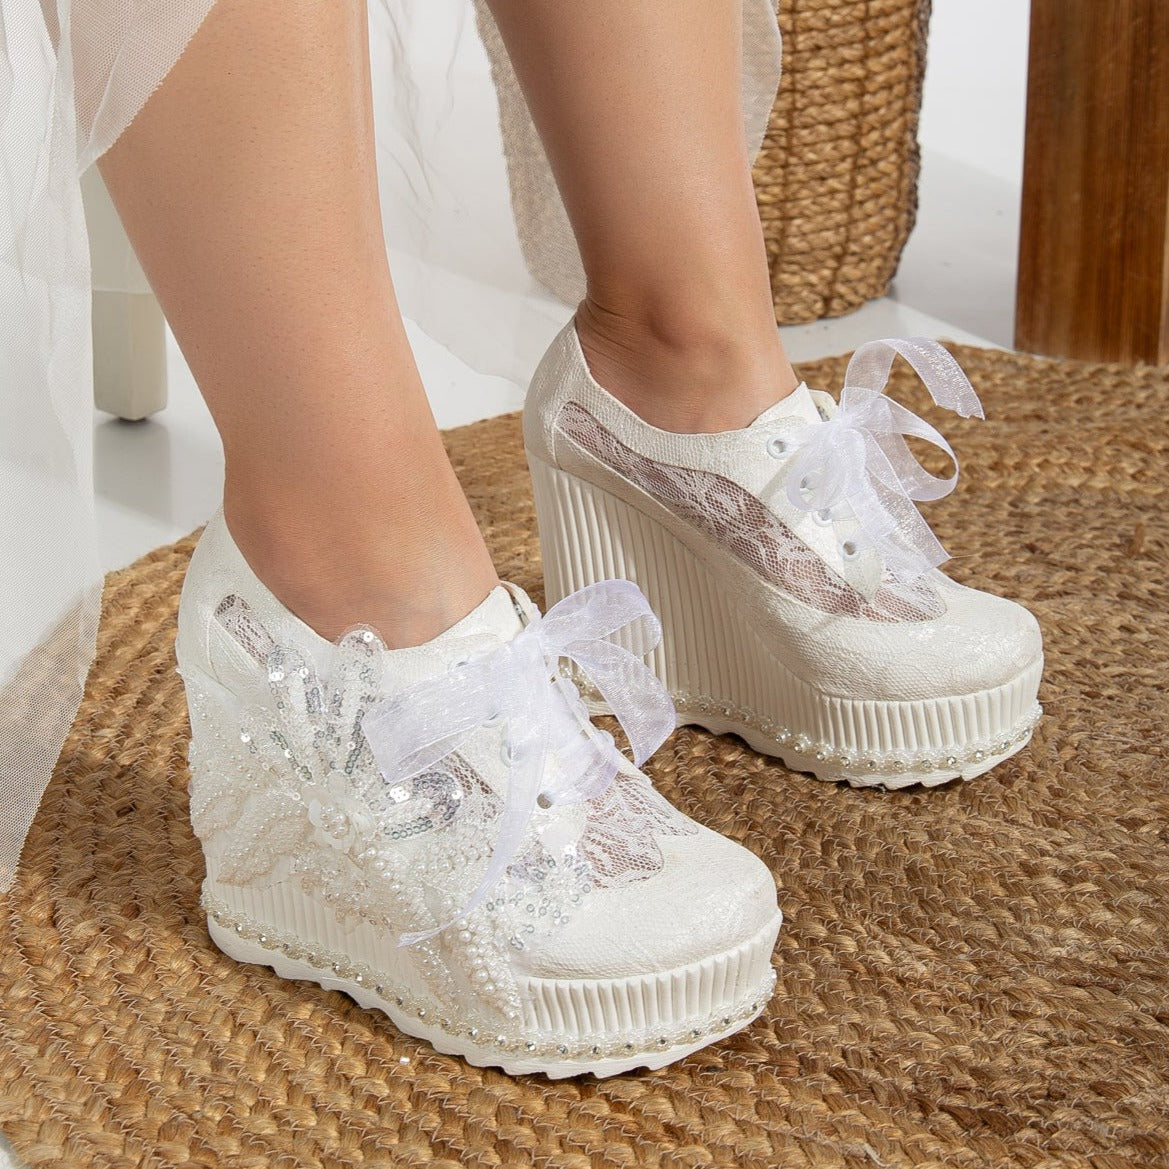 Lace wedding sneakers, Bridal lace sneakers, White lace bridal sneakers, Lace wedding tennis shoes, Lace embellished wedding sneakers, Lace bridal trainers, Wedding sneakers with lace detail, Lace bridal kicks, Lace wedding athletic shoes, Lace wedding sneakers for brides